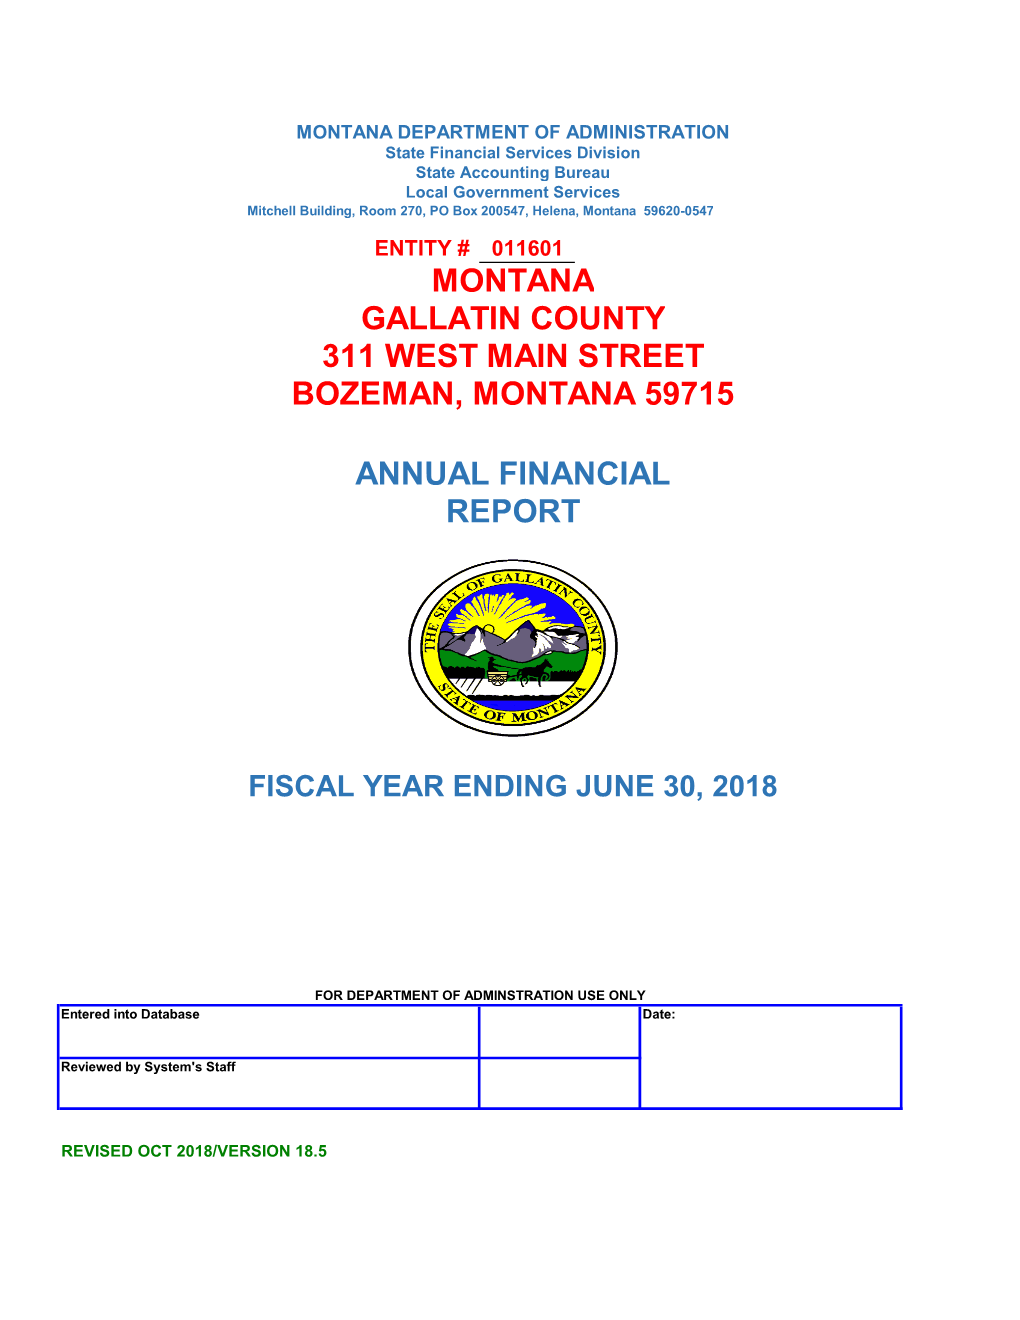 Fiscal Year 2018 (June 30, 2018) 154,625,004